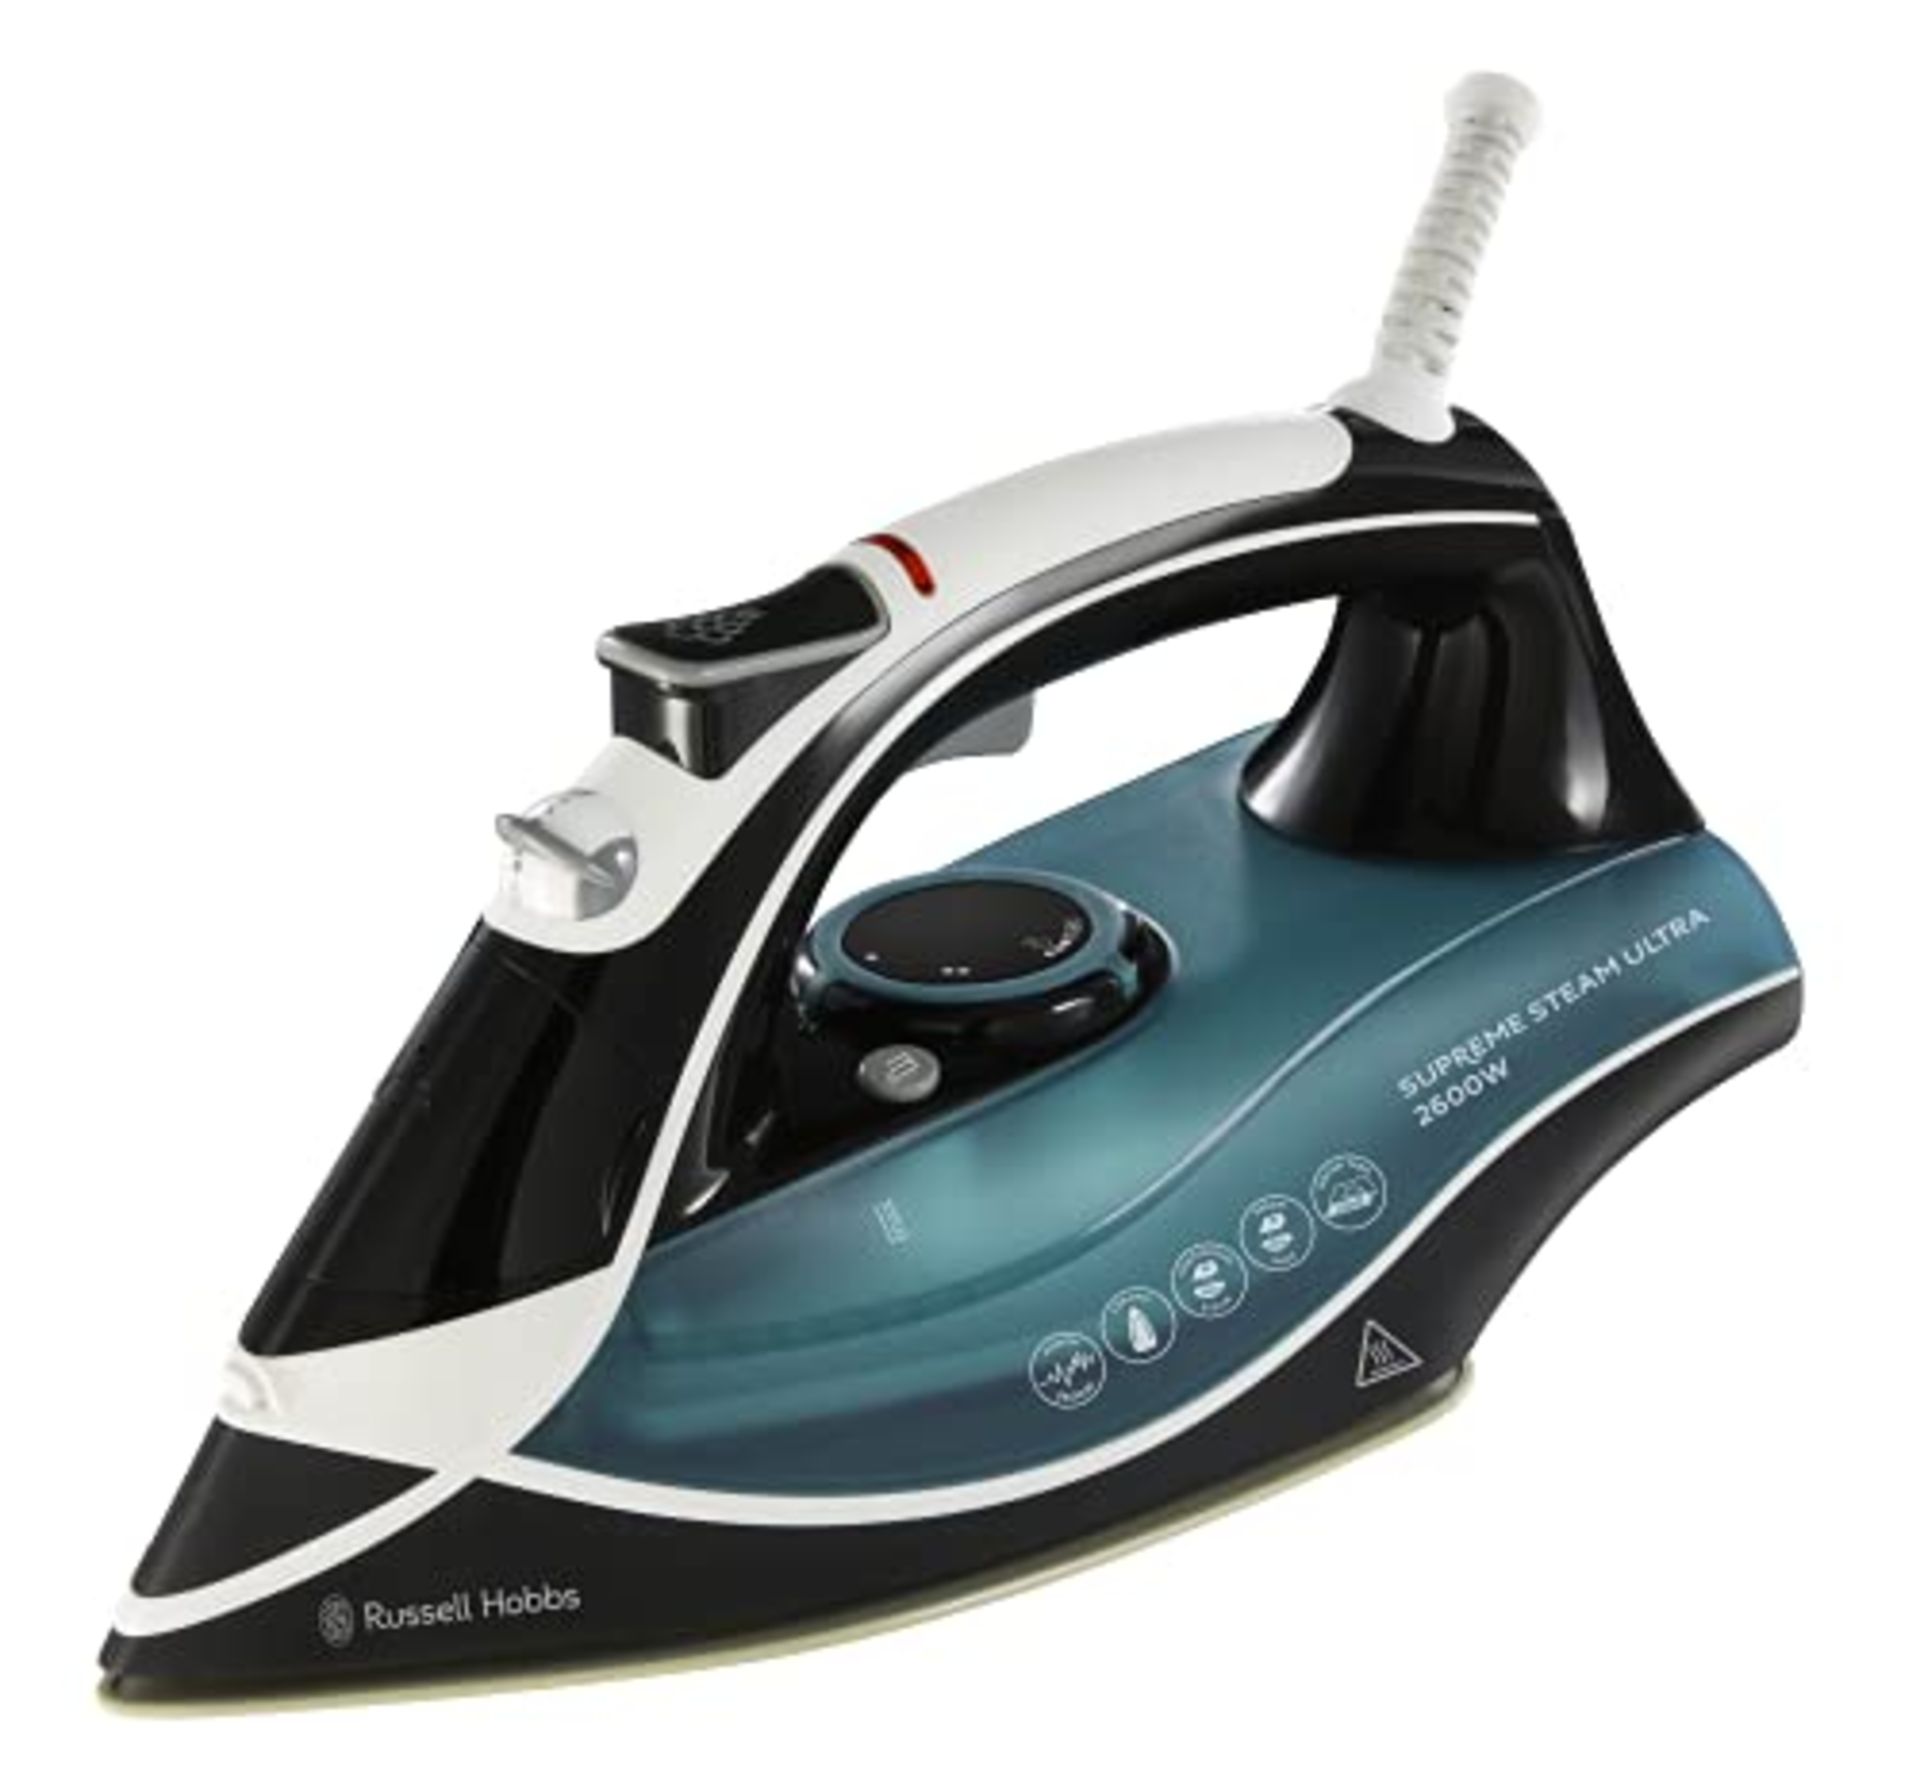 RRP £80.00 Russell Hobbs Supreme Steam Traditional Iron 23260, 2600 W - Teal/Black